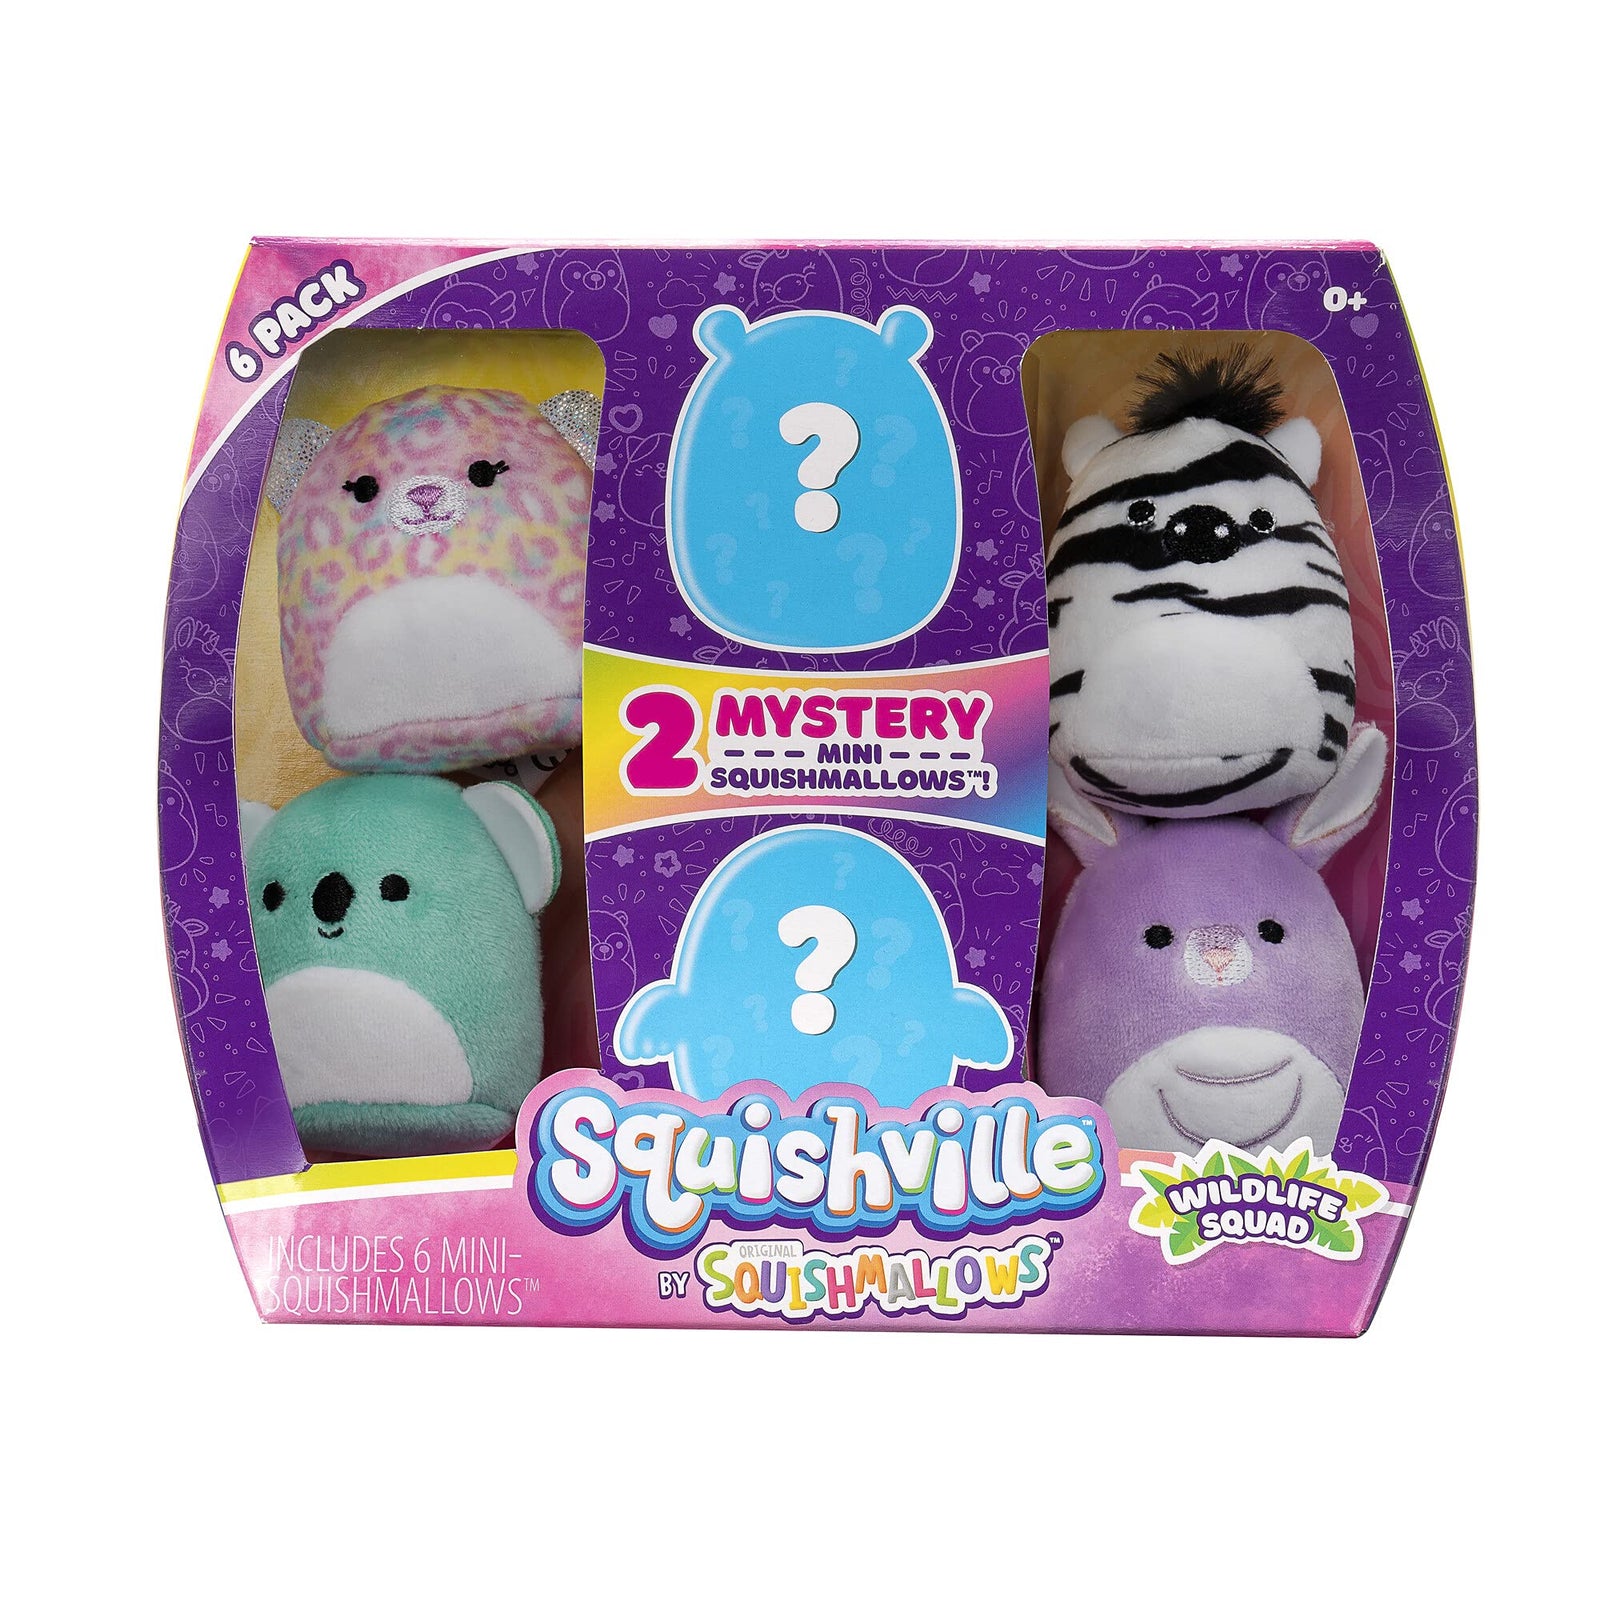 Squishville Mystery Mini-Squishmallows Plush - Wildlife Squad - Six 2-Inch Mini Plush Characters - Includes Michaela and Kiki Plus Four Mystery Figures - Irresistibly Soft, Colorful Plush